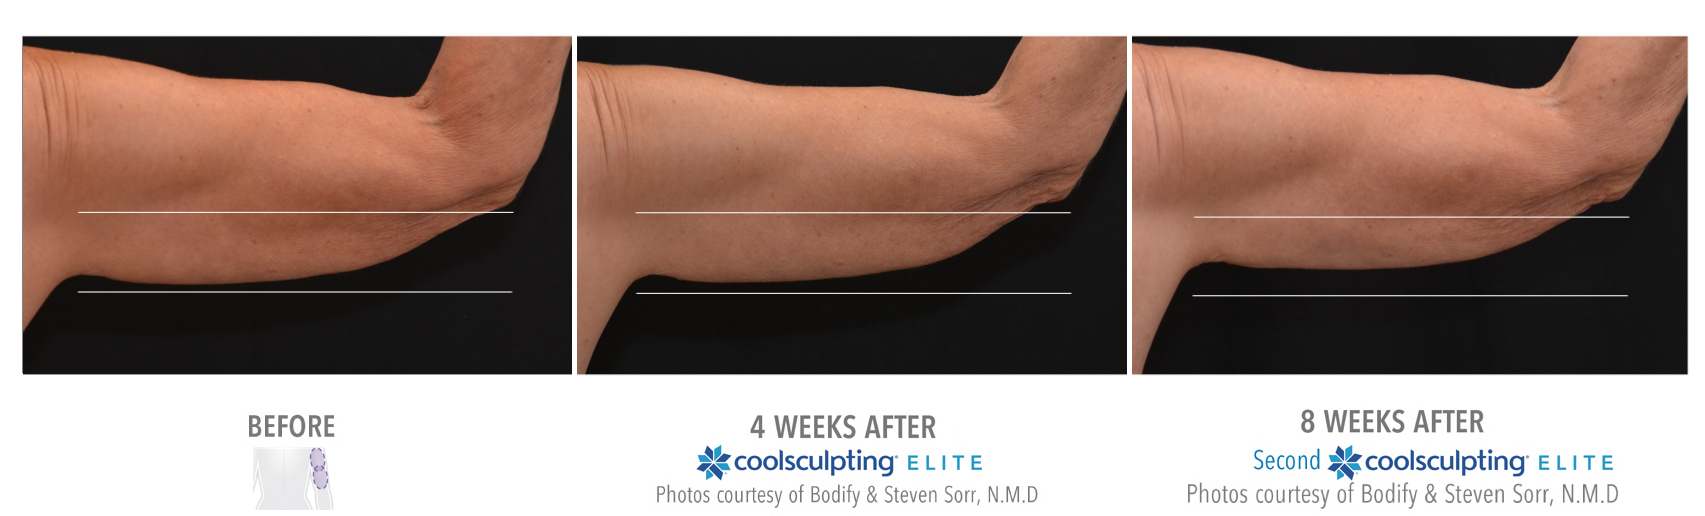 Coolsculpting Elite Treatment Results Before and After on a Female Upper Arms | Melindas Medical Spa & Salon in North Myrtle Beach, SC